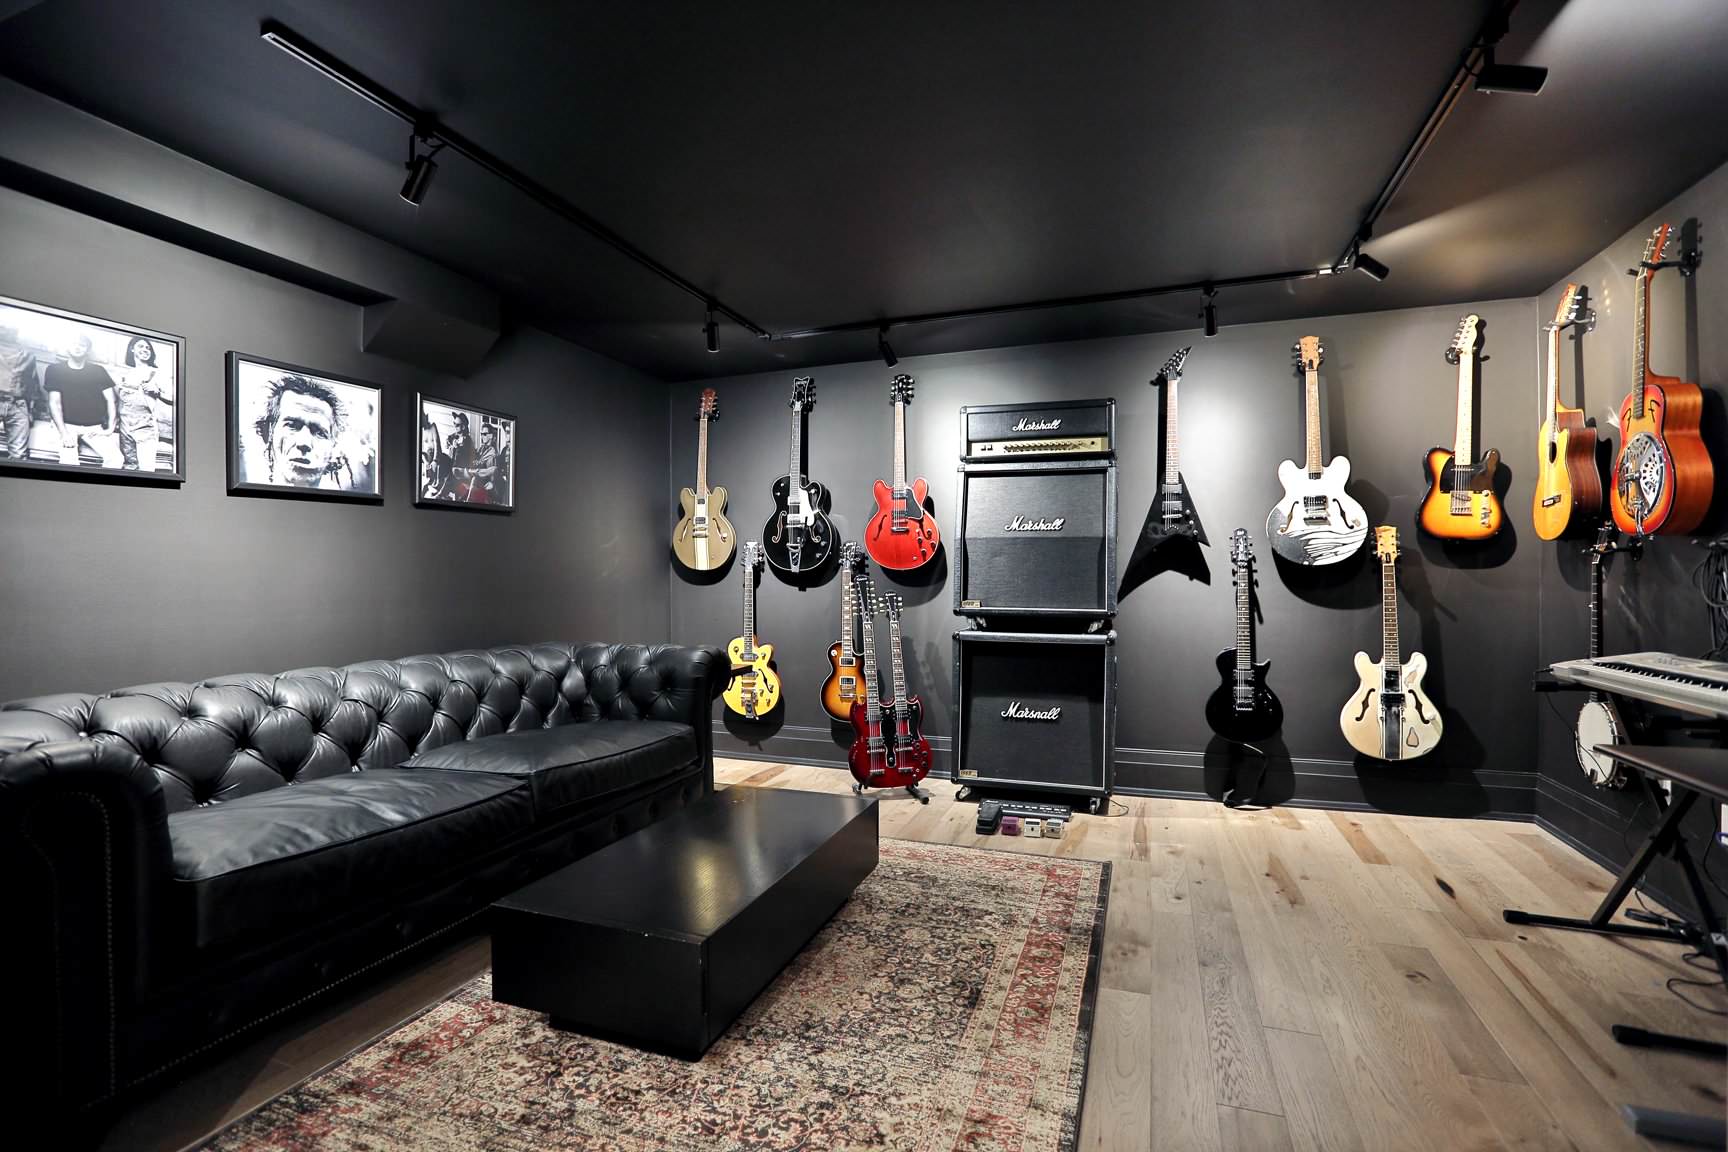 75 Basement with Black Walls Ideas You'll Love - January, 2023 | Houzz